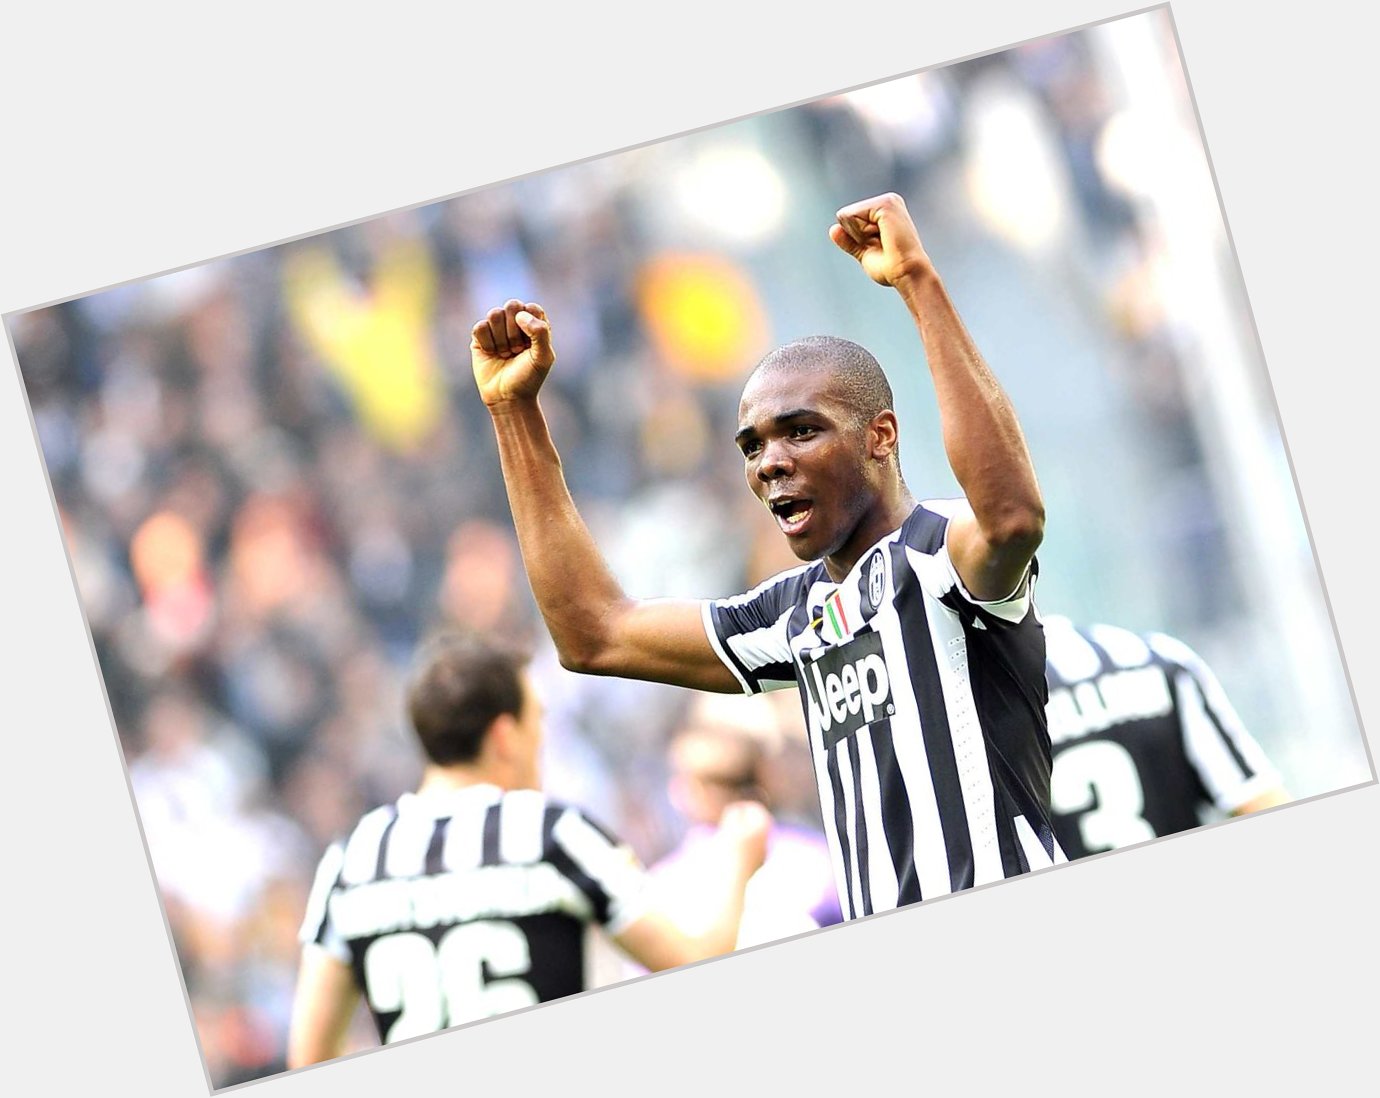 Happy birthday to former Juventus defender Angelo Ogbonna, when turns 29 today.

Games: 55 : 5 